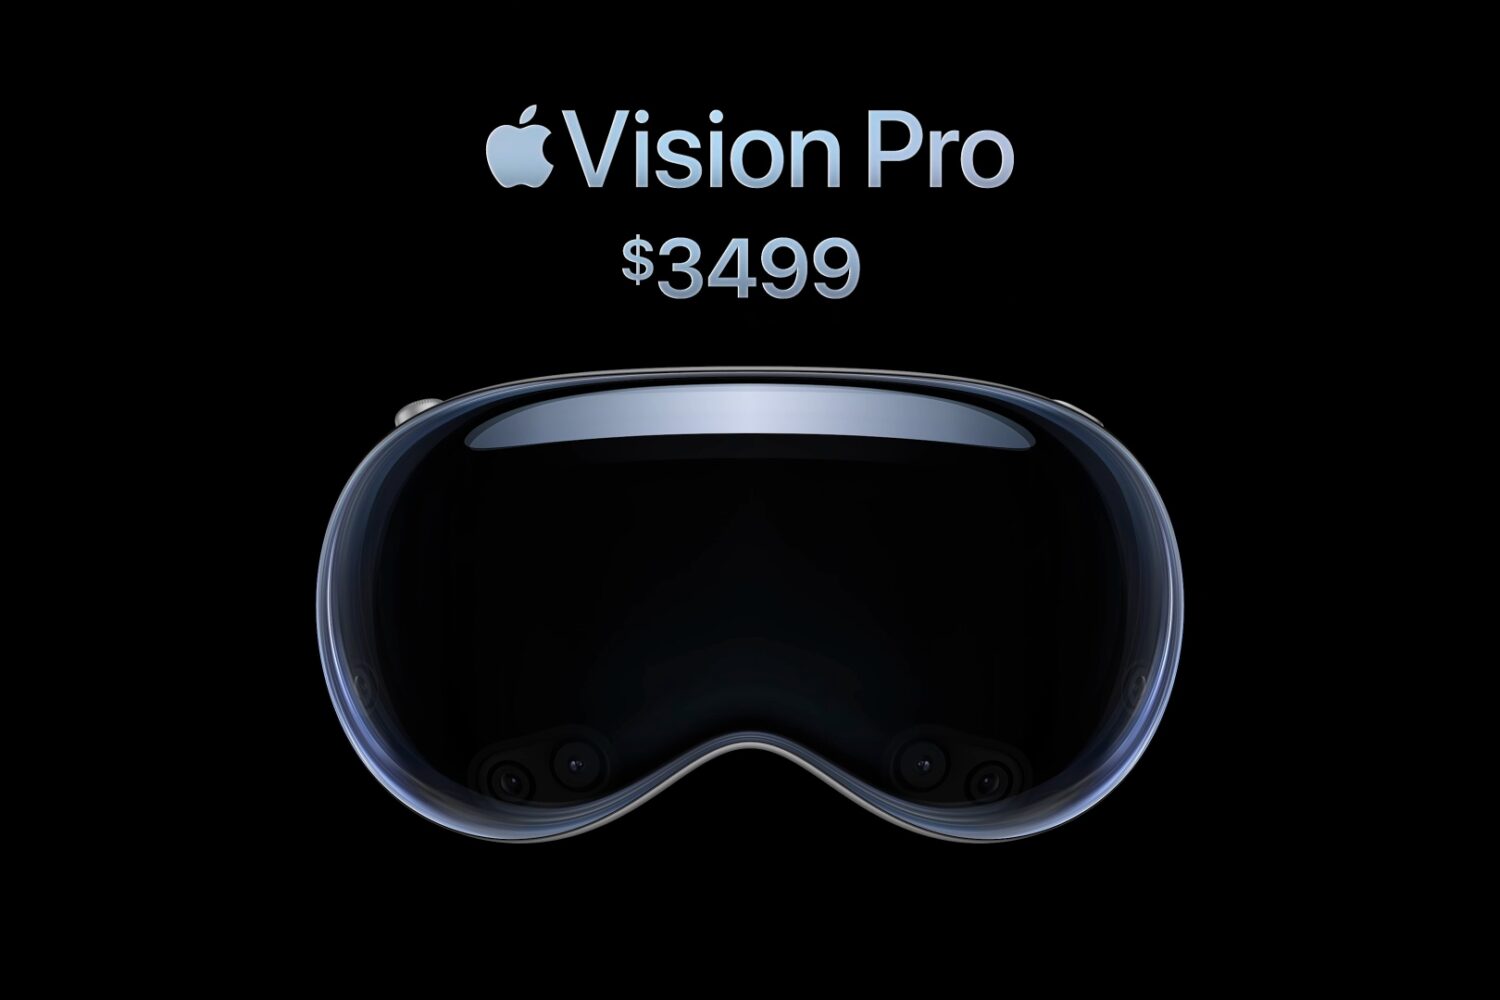 Vision Pro headset along with its name and price, set against a solid dark background